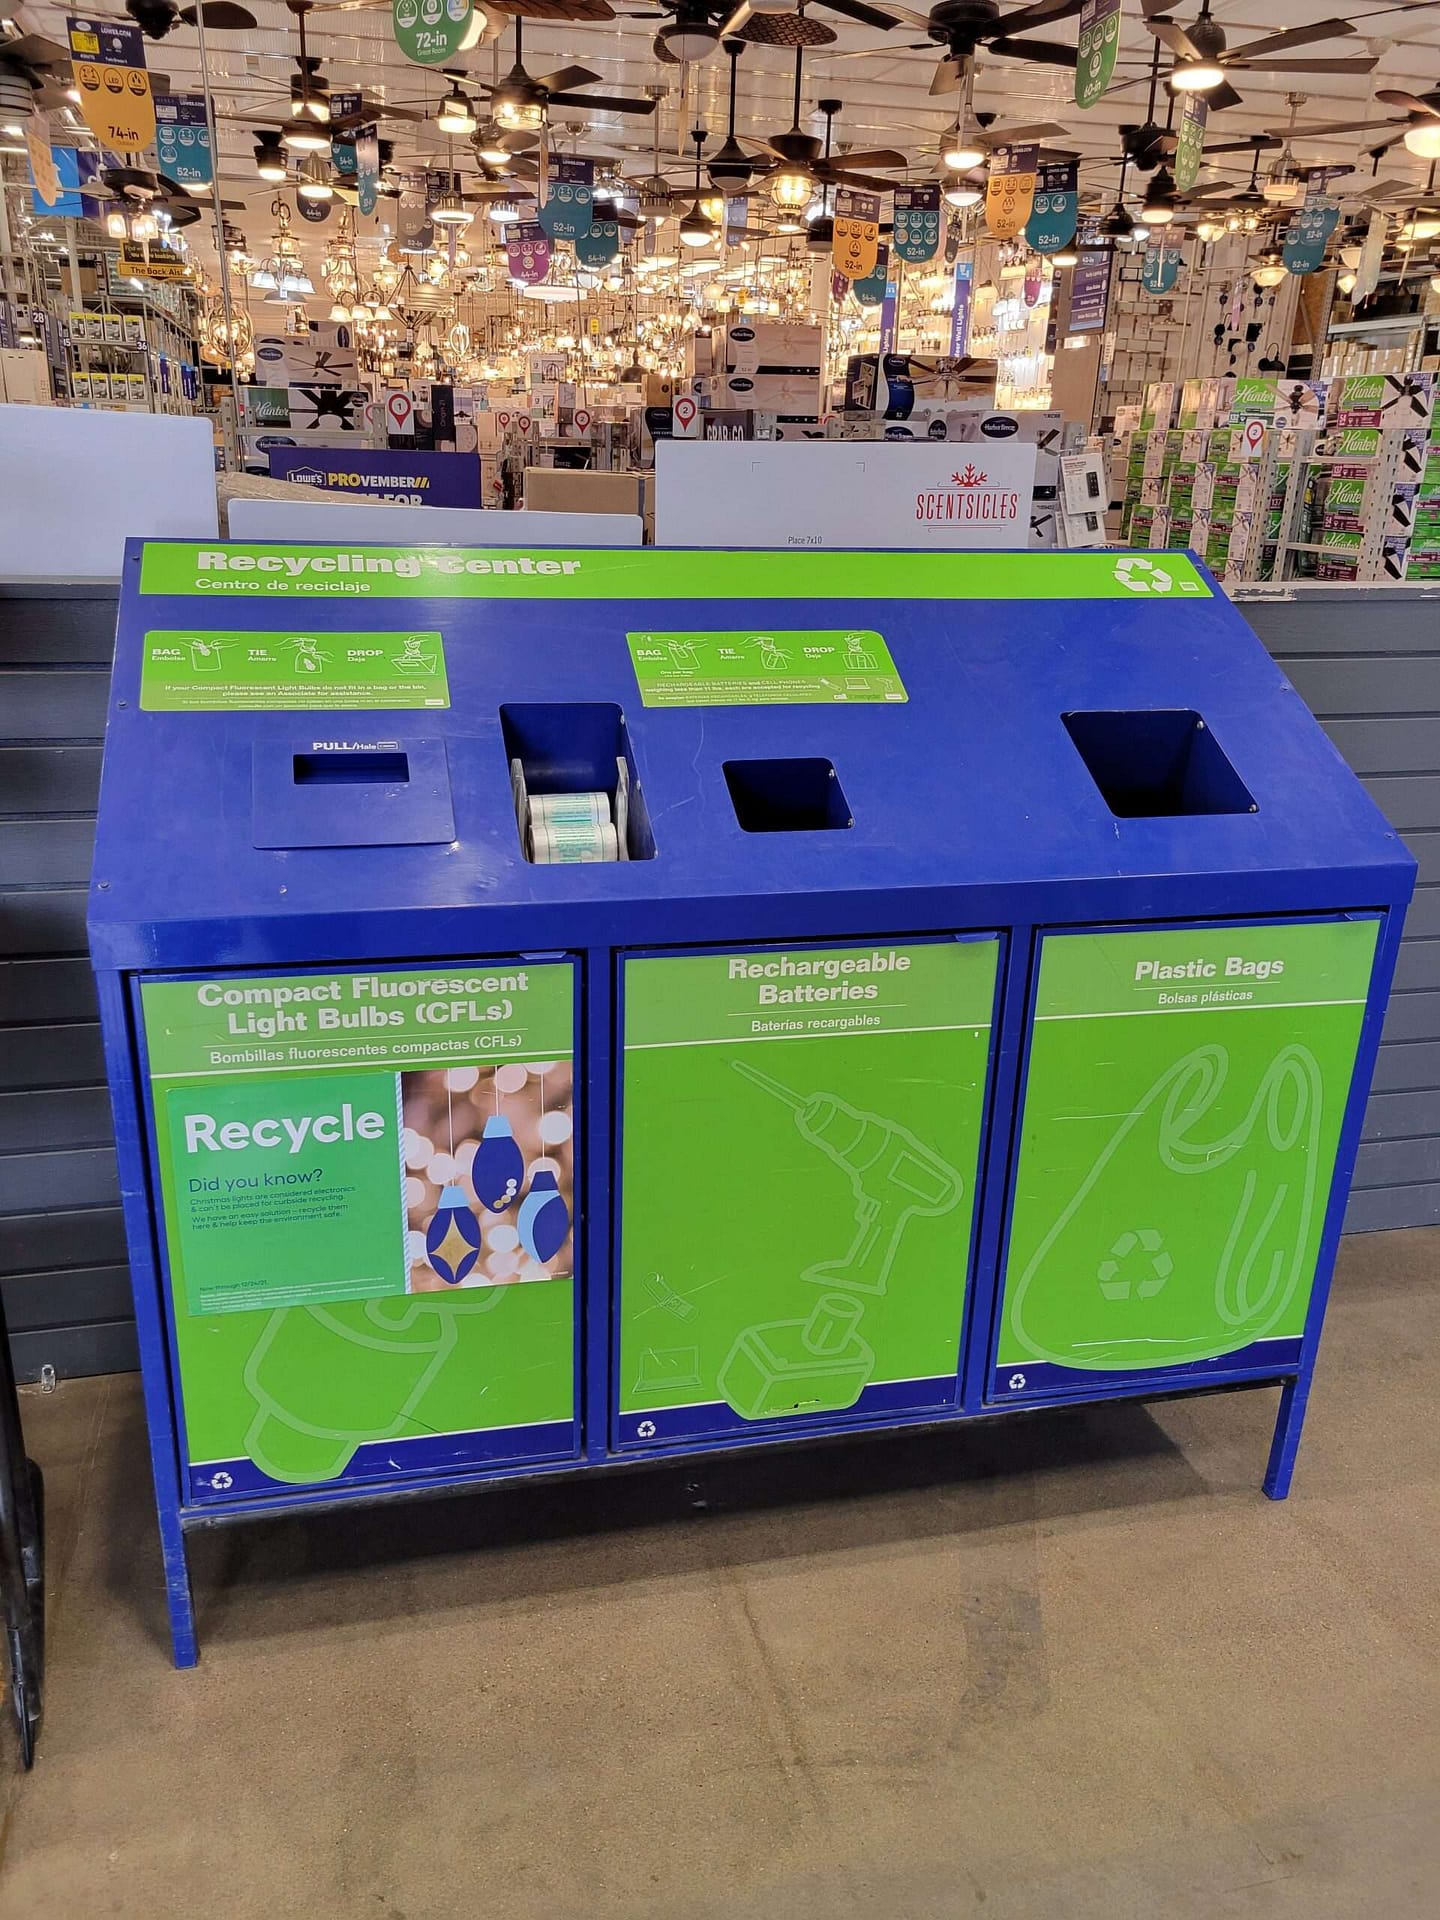 recycle bubble wrap, plastic bags, plastic wrap, batteries and light bulbs at Lowe's in Austin